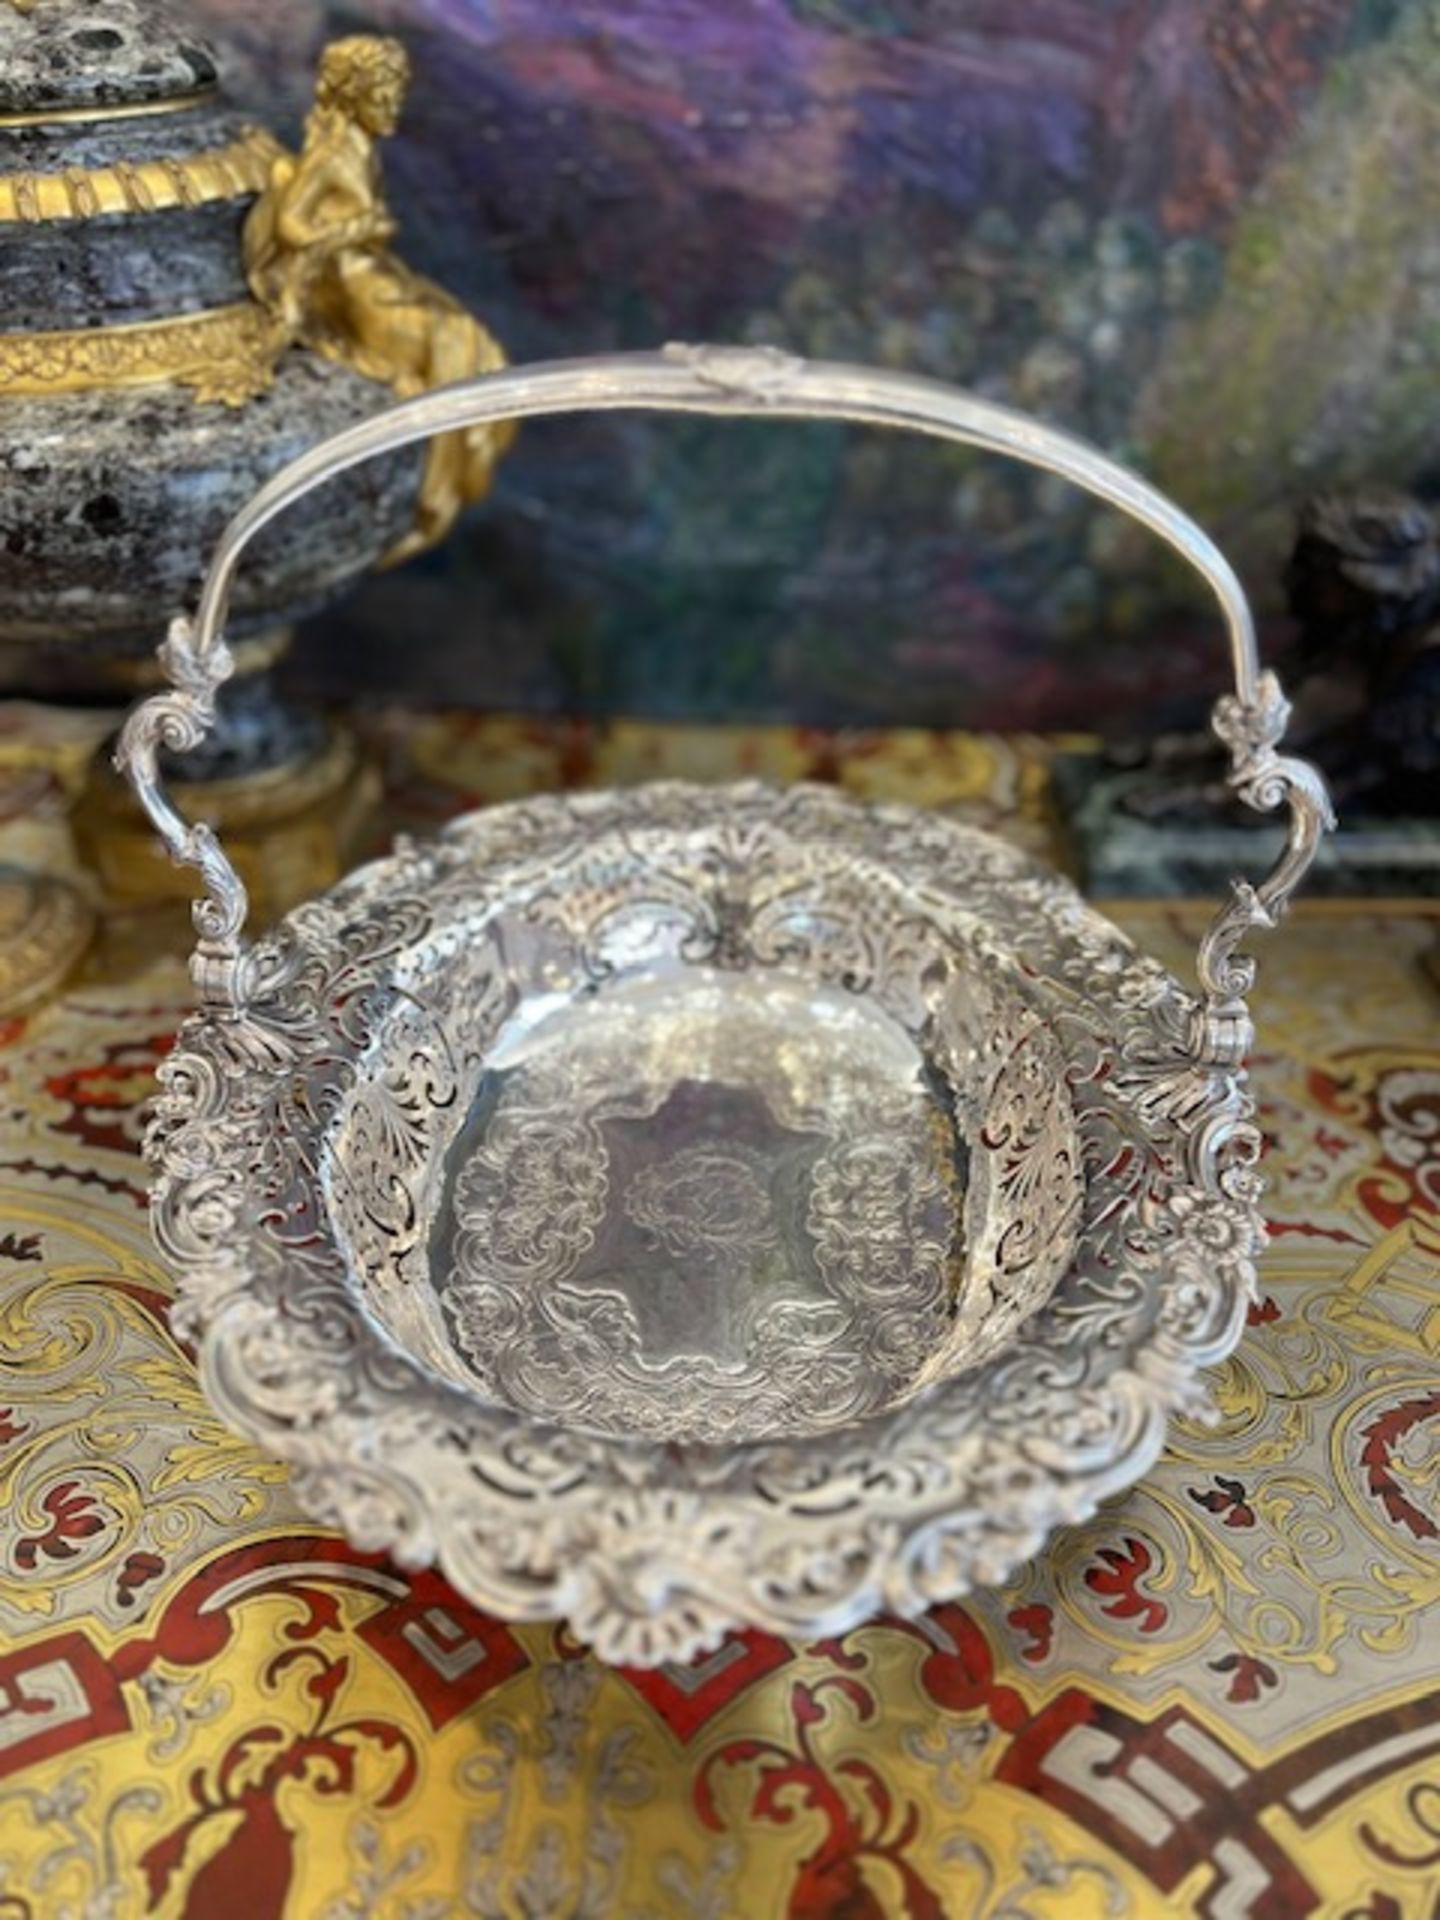 A MAGNIFICENT MID 18TH CENTURY STERLING SILVER GEORGIAN CAKE BASKET, LONDON, 1745 - Image 16 of 24